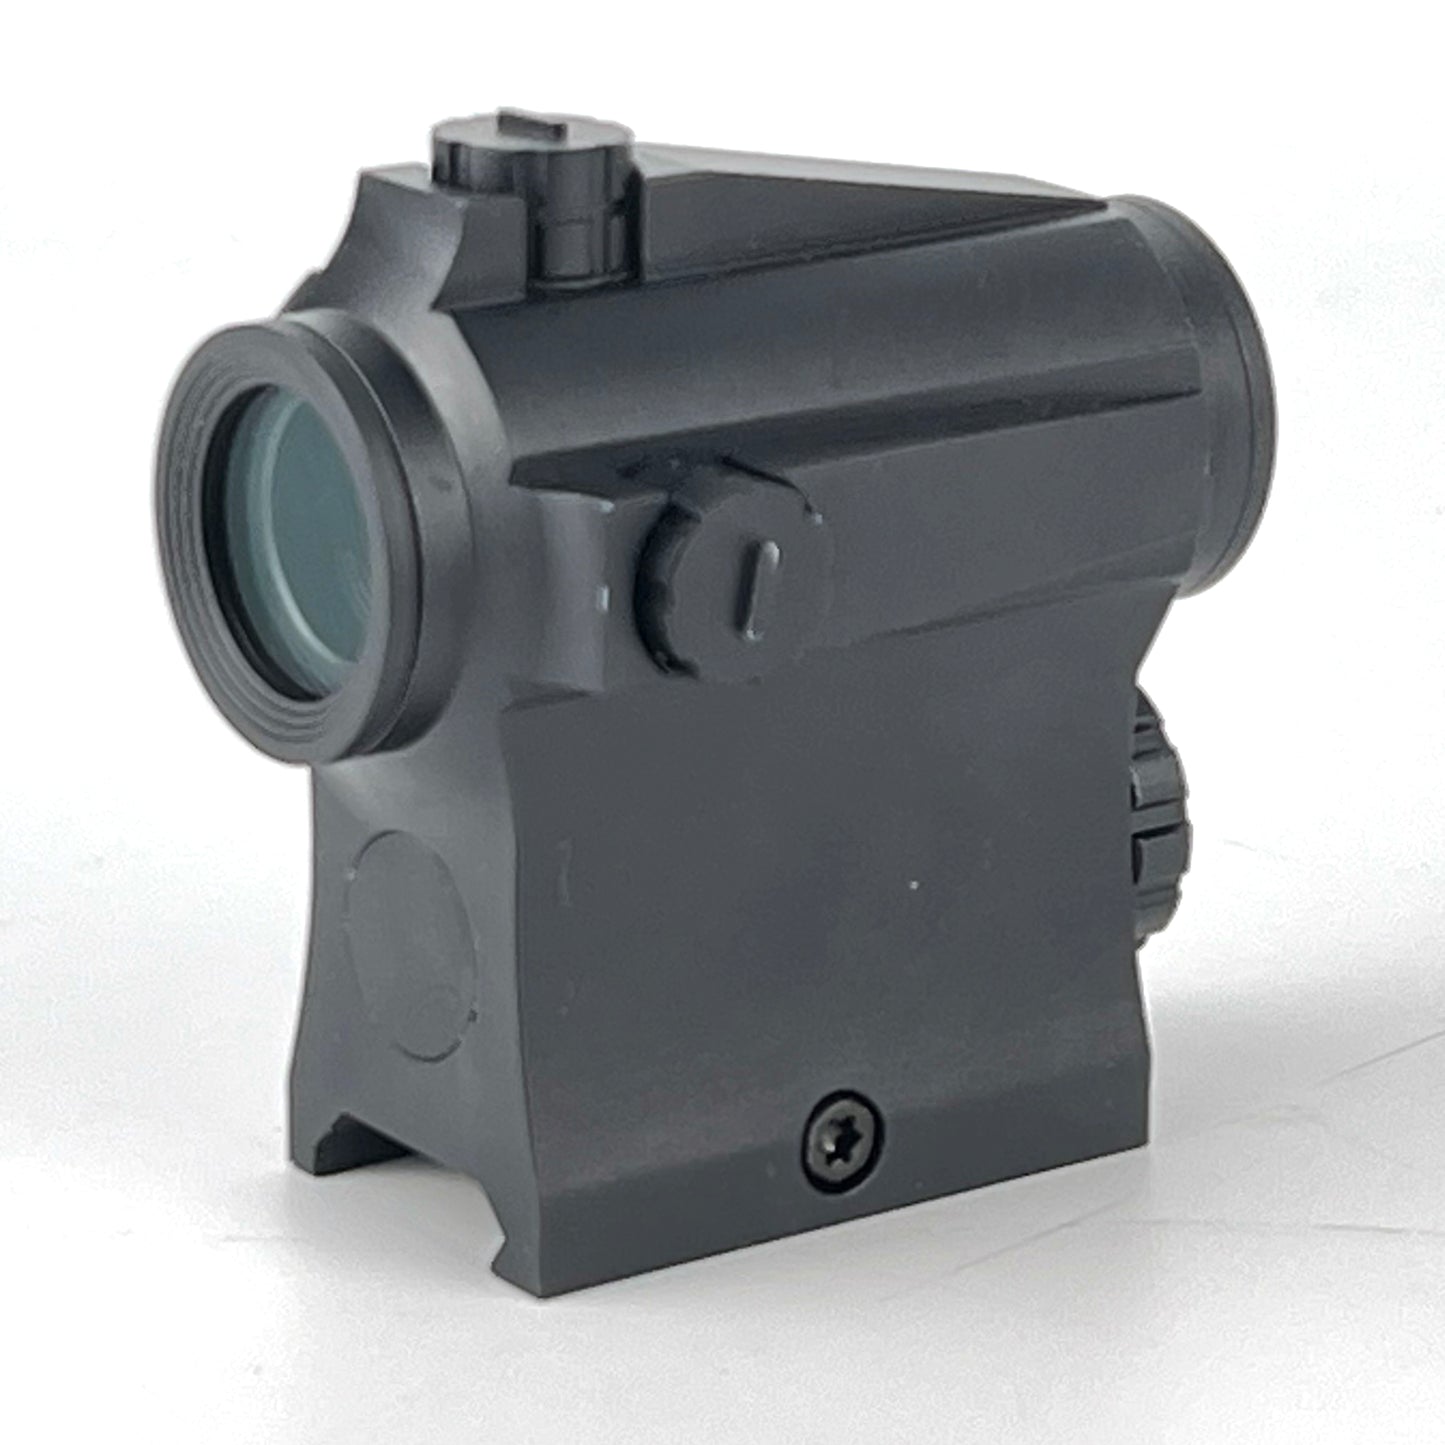 Heightened 3MOA Compact Red Dot Sight For Caliber .223/5.56 And .308/7.62